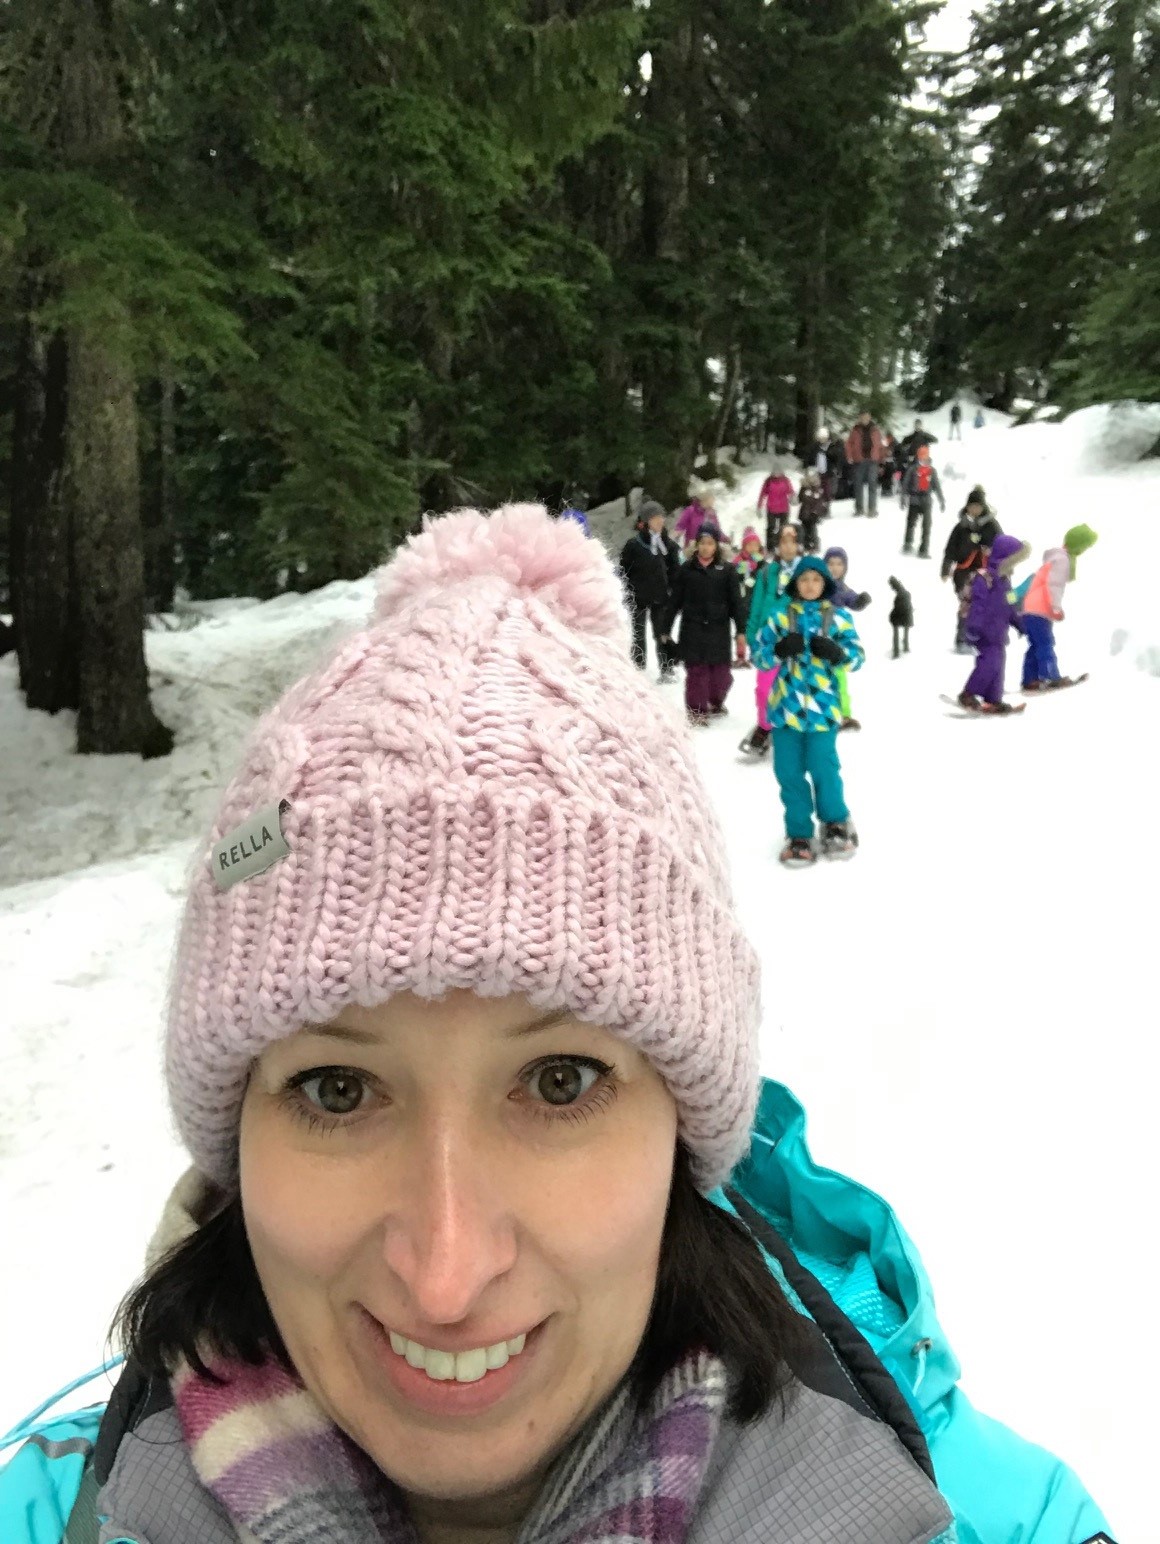 Woman taking a selfie in a pink toque. It is snowing and there are children and trees behind her. Maxine Giannelli, Senior Manager of Development and Communications at Anxiety Canada